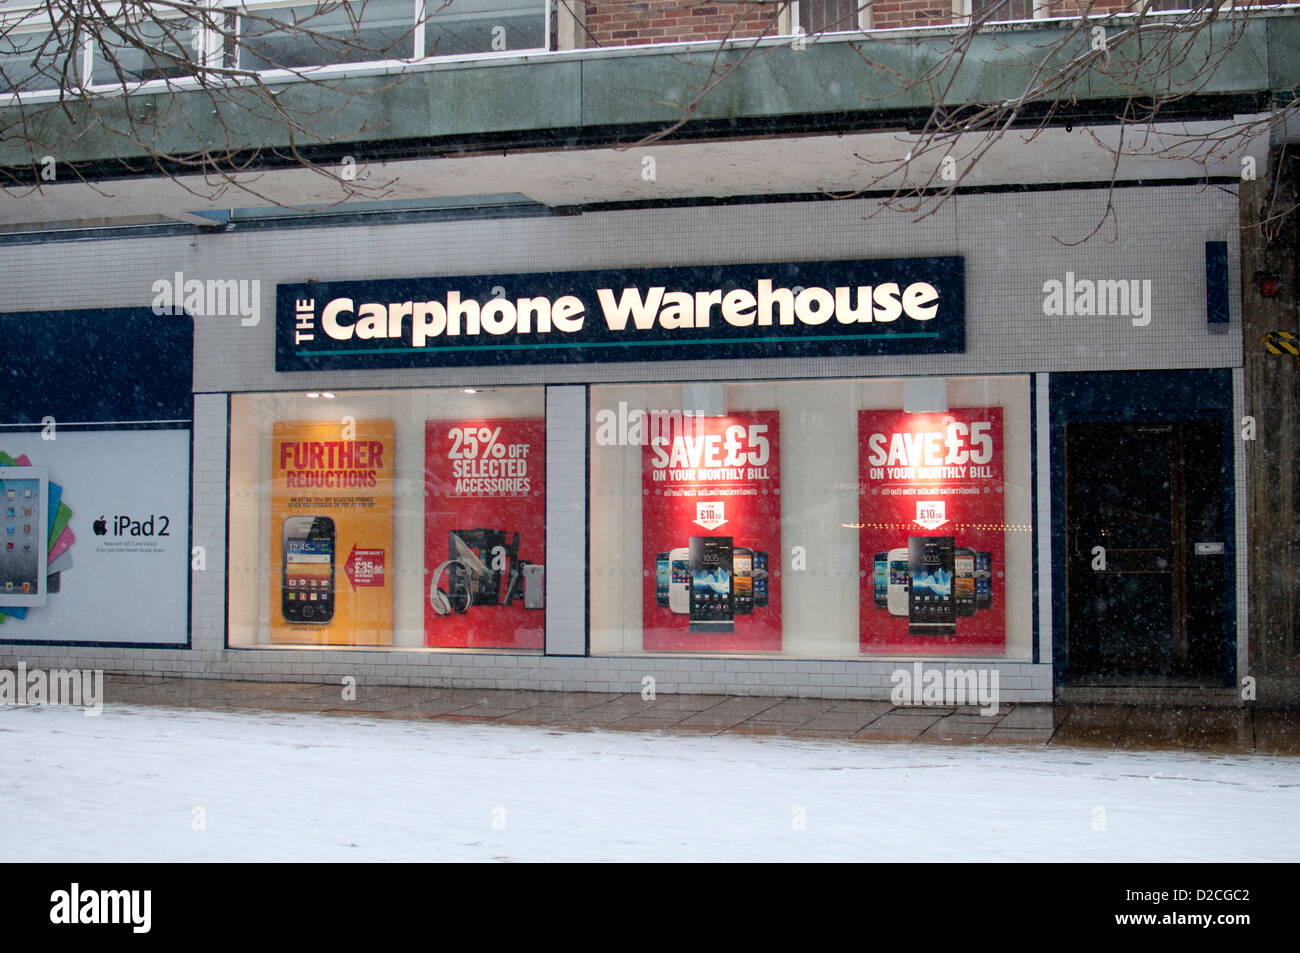 The Carphone Warehouse shop in snowy weather Stock Photo